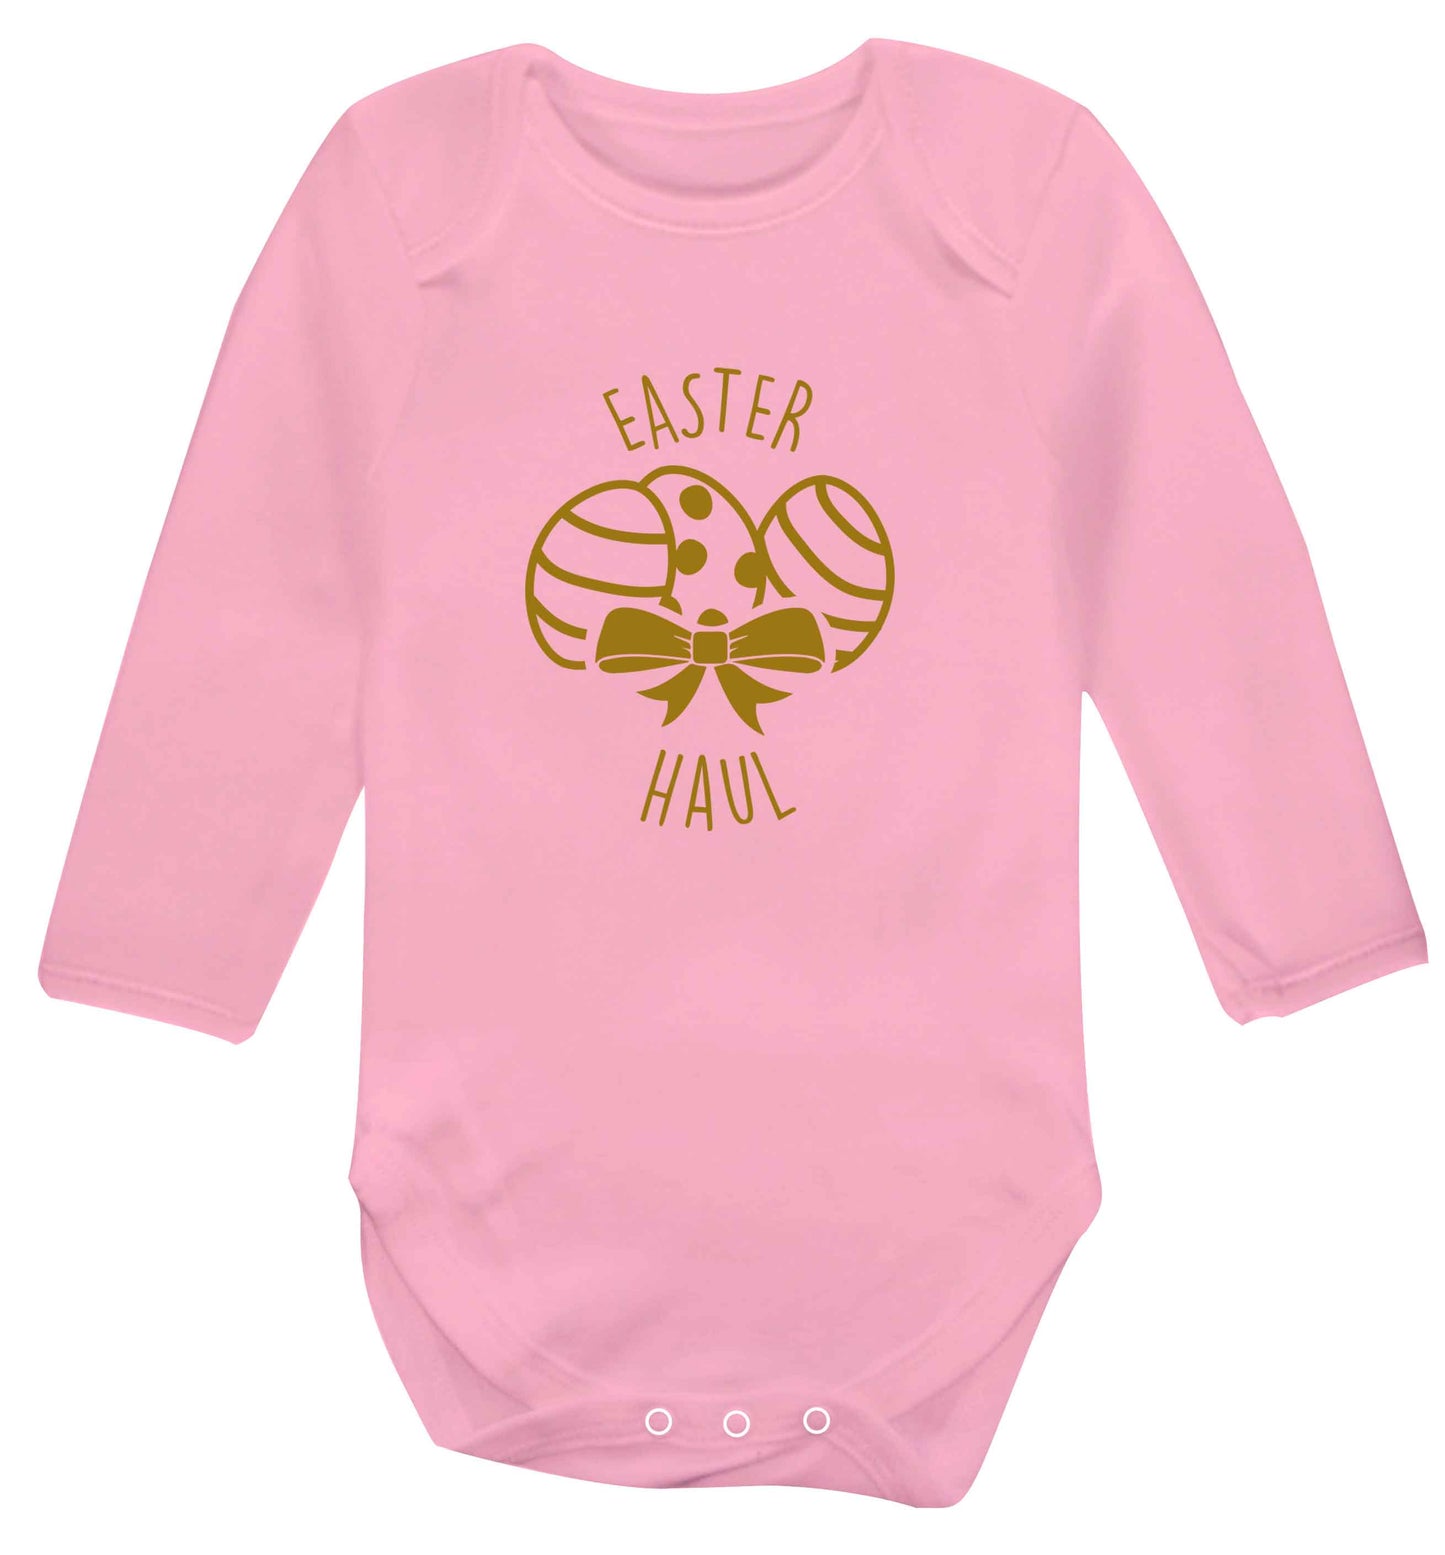 Easter haul baby vest long sleeved pale pink 6-12 months